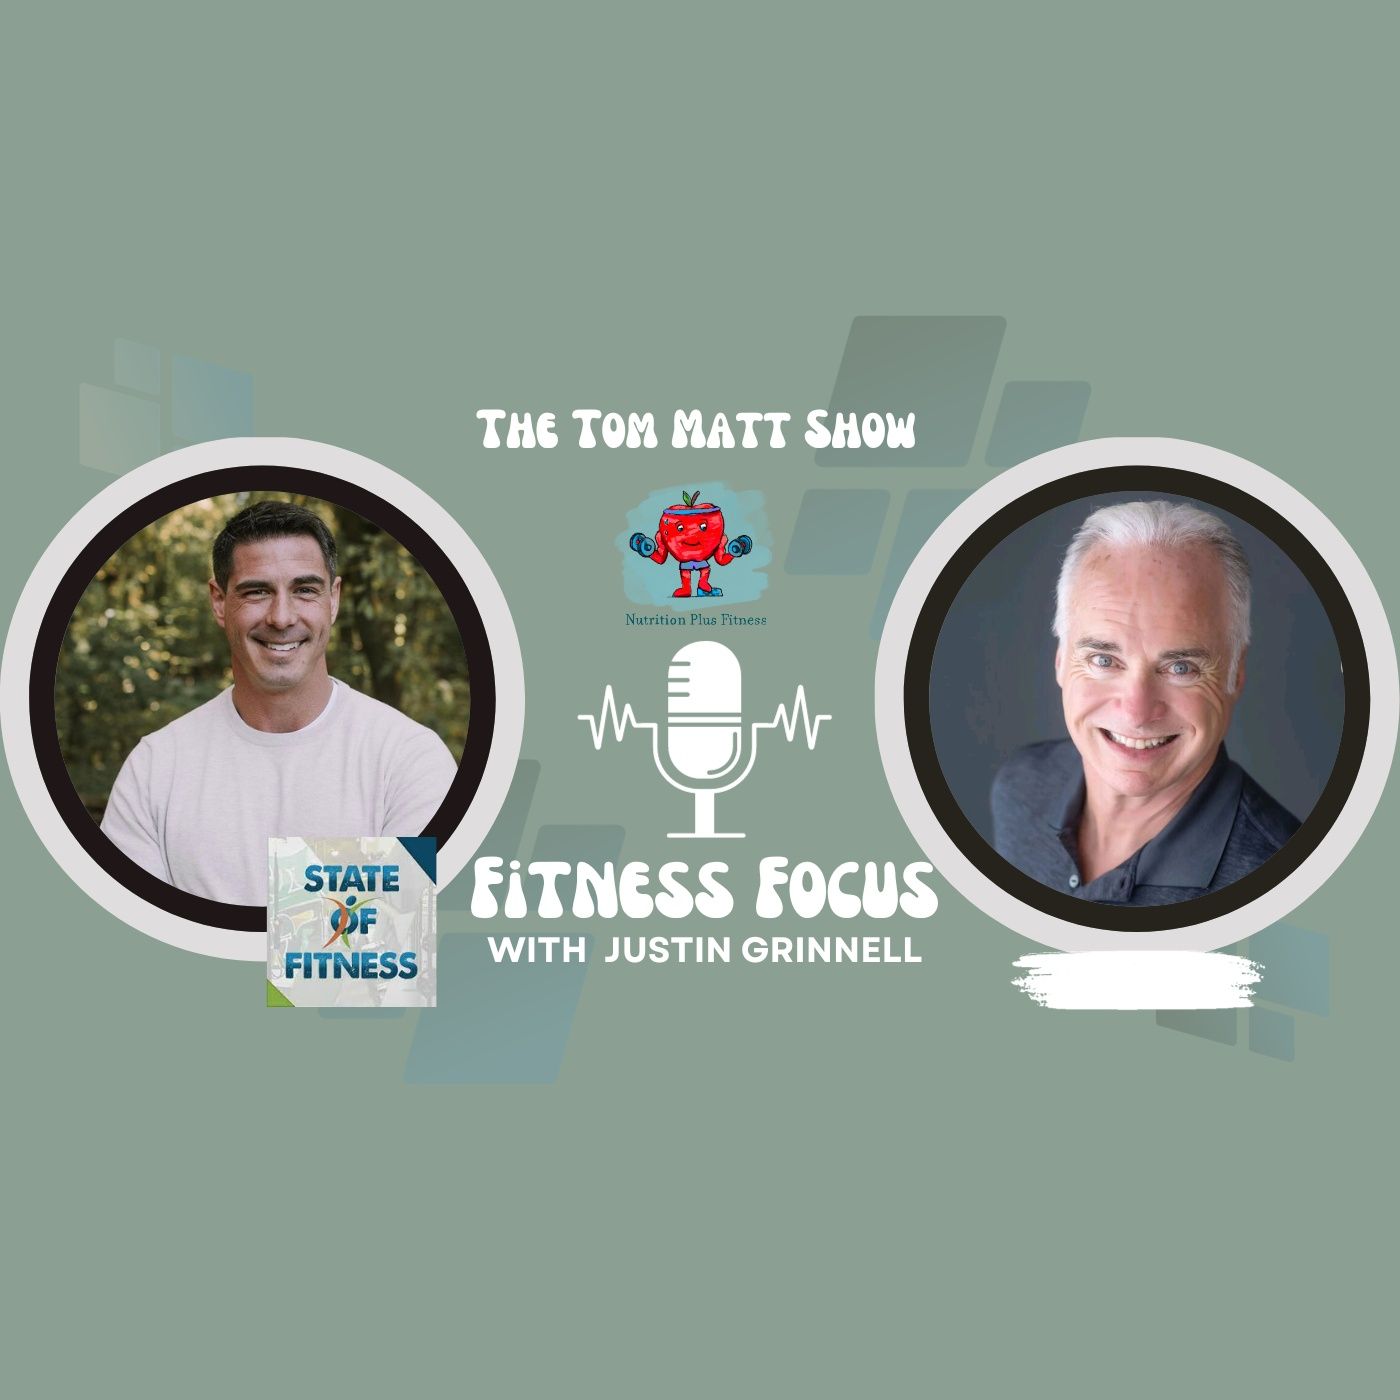 Fitness Focus with Justin Grinnell